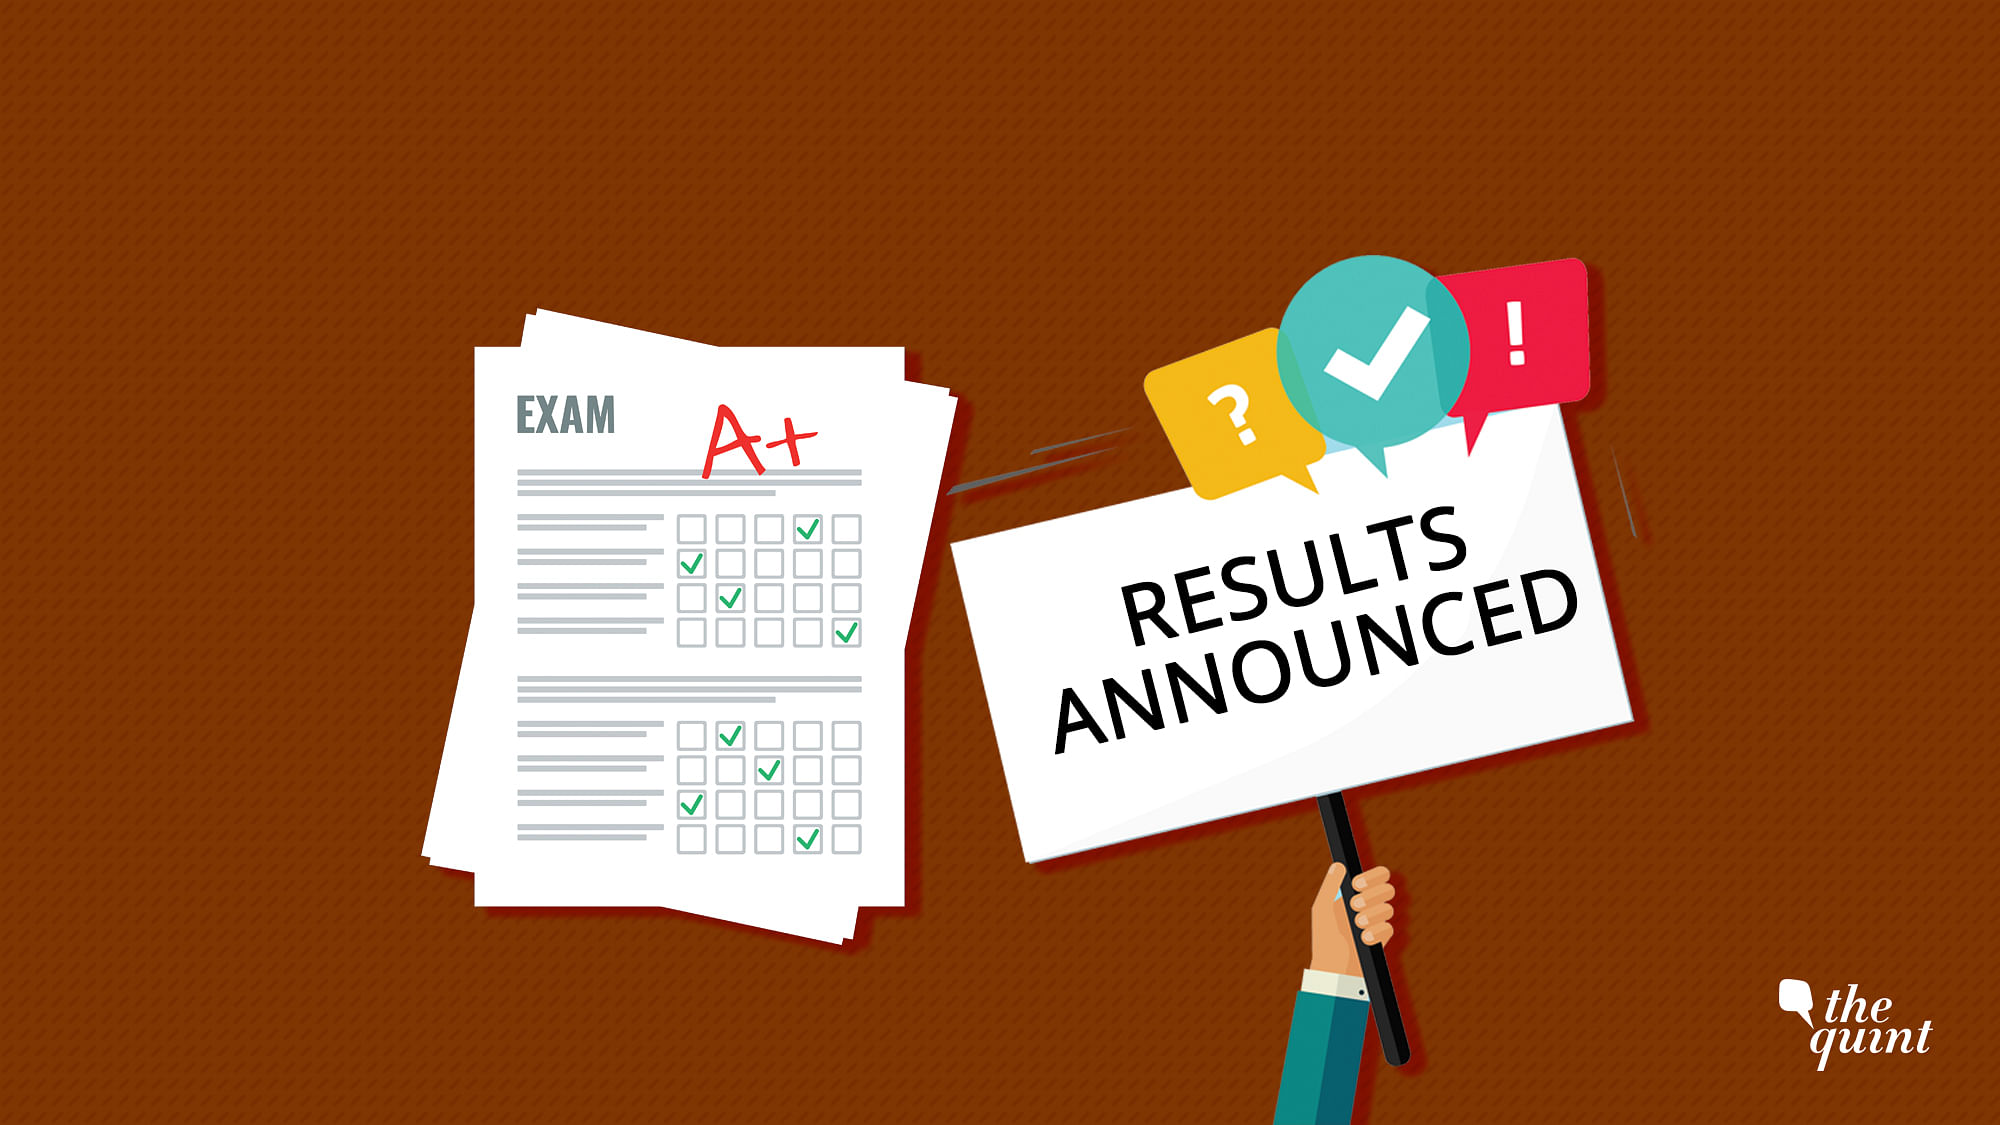 Uttarakhand Board: Class 10 and 12 results are out